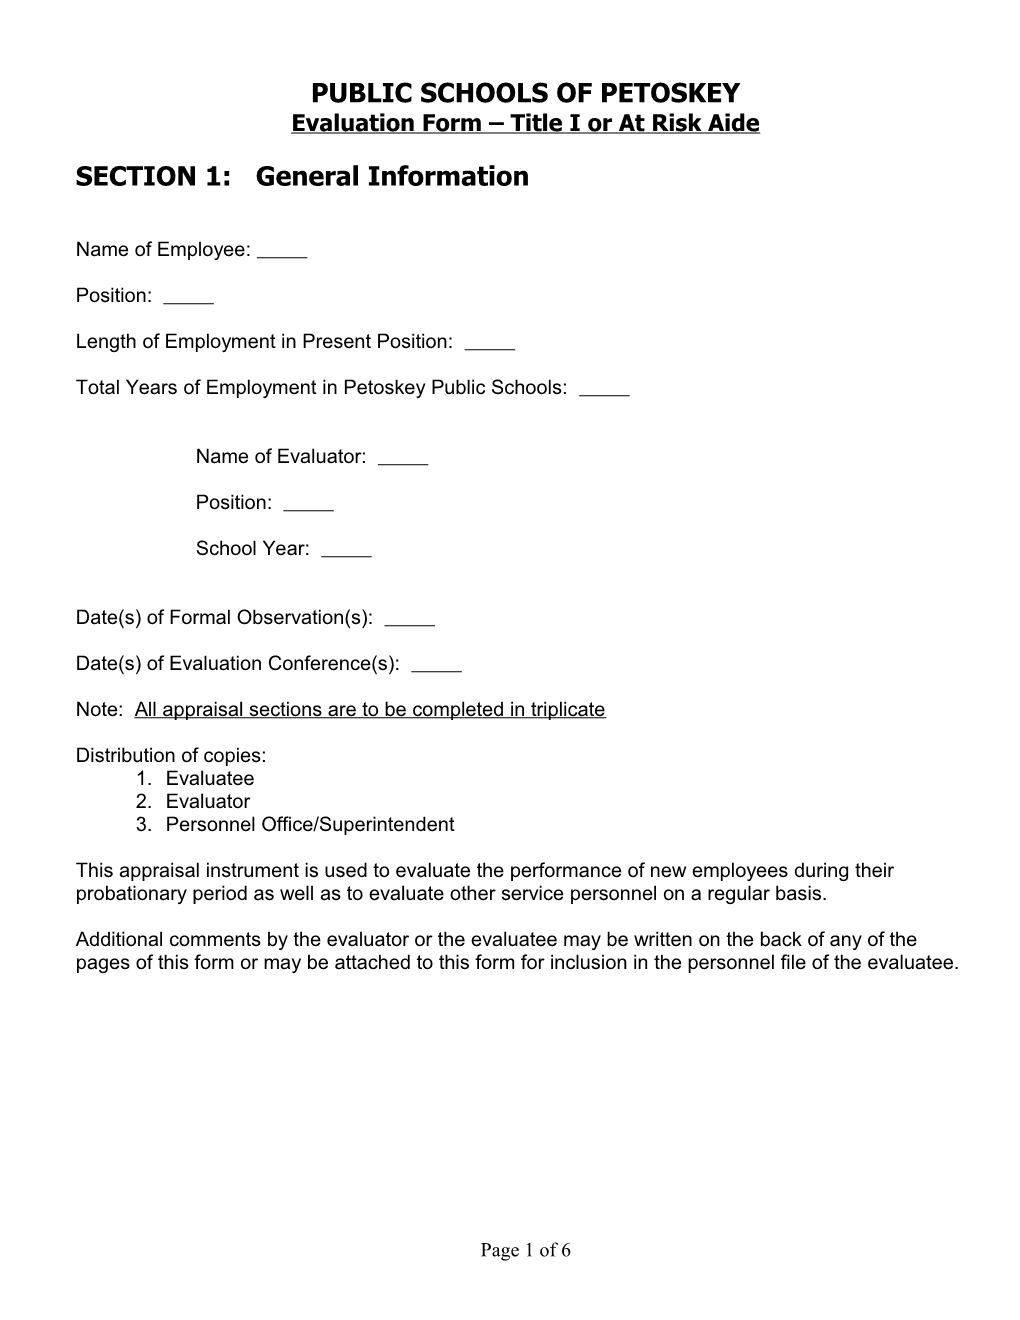 Evaluation Form Title I Or at Risk Aide